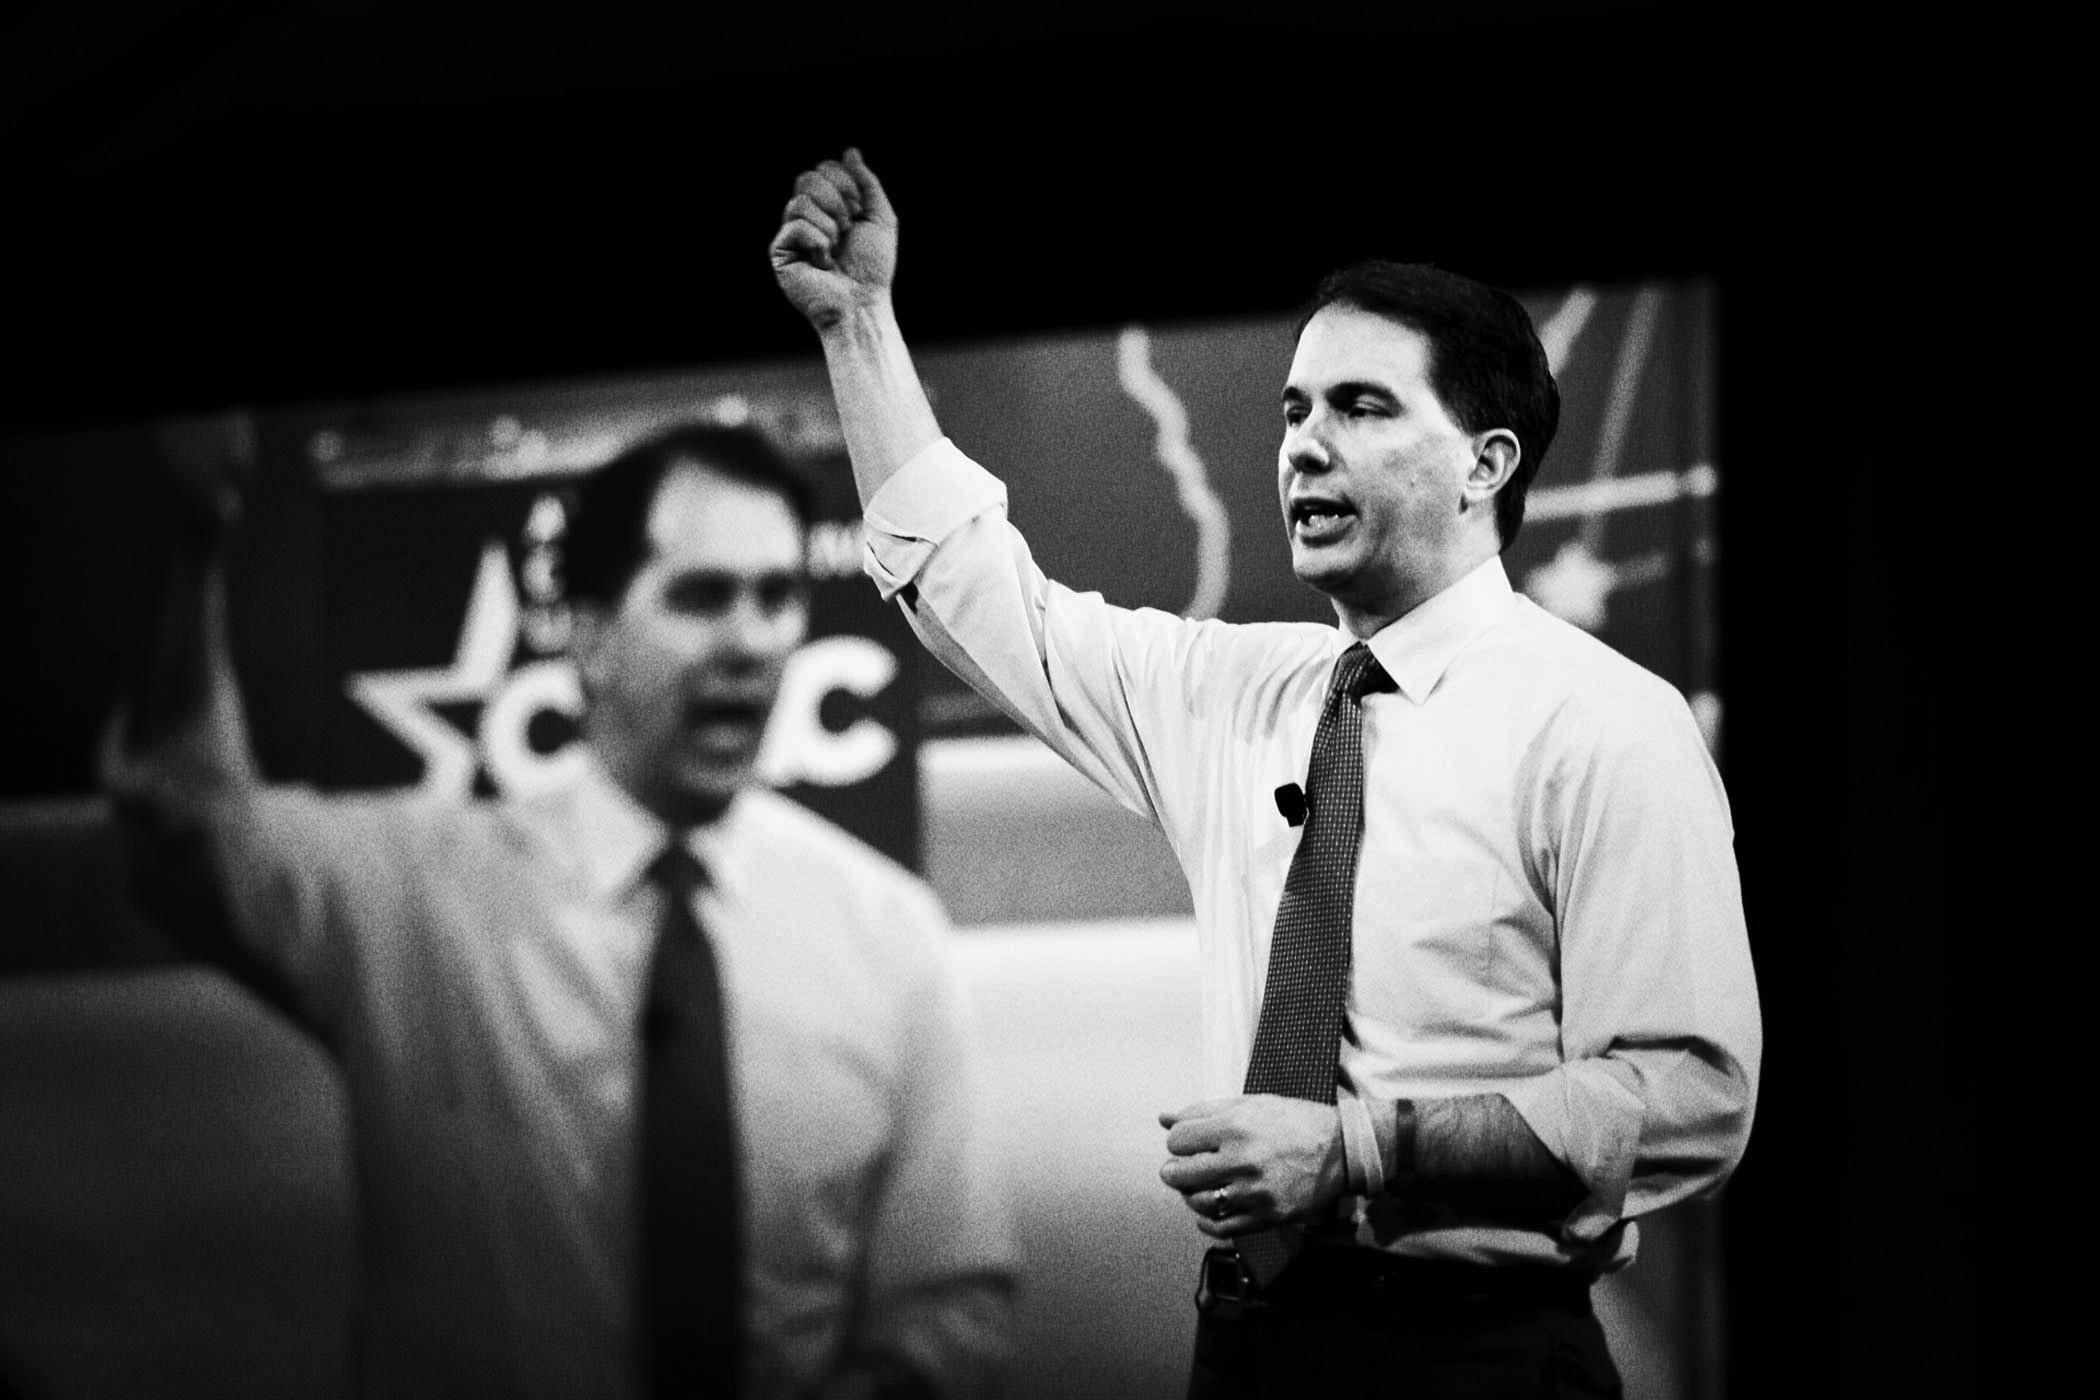 Wisconsin Governor Scott Walker at CPAC in National Harbor, Md., on Feb. 26, 2015.